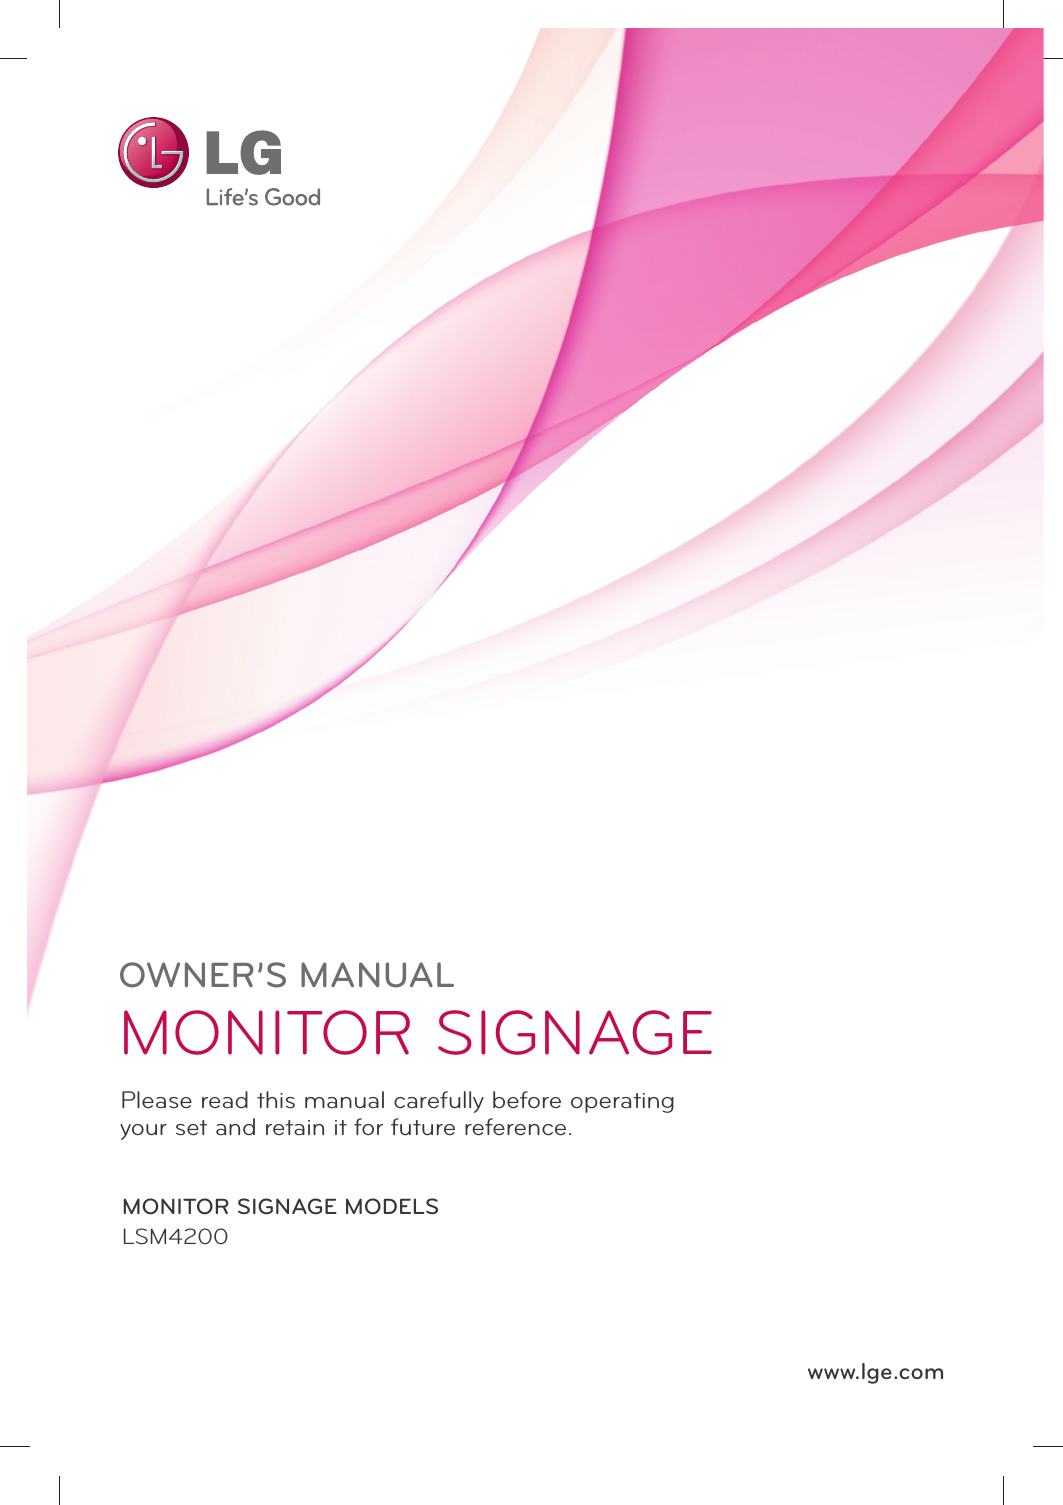 OWNER’S MANUALMONITOR SIGNAGE MONITOR SIGNAGE MODELSLSM4200www.lge.comPlease read this manual carefully before operatingyour set and retain it for future reference.